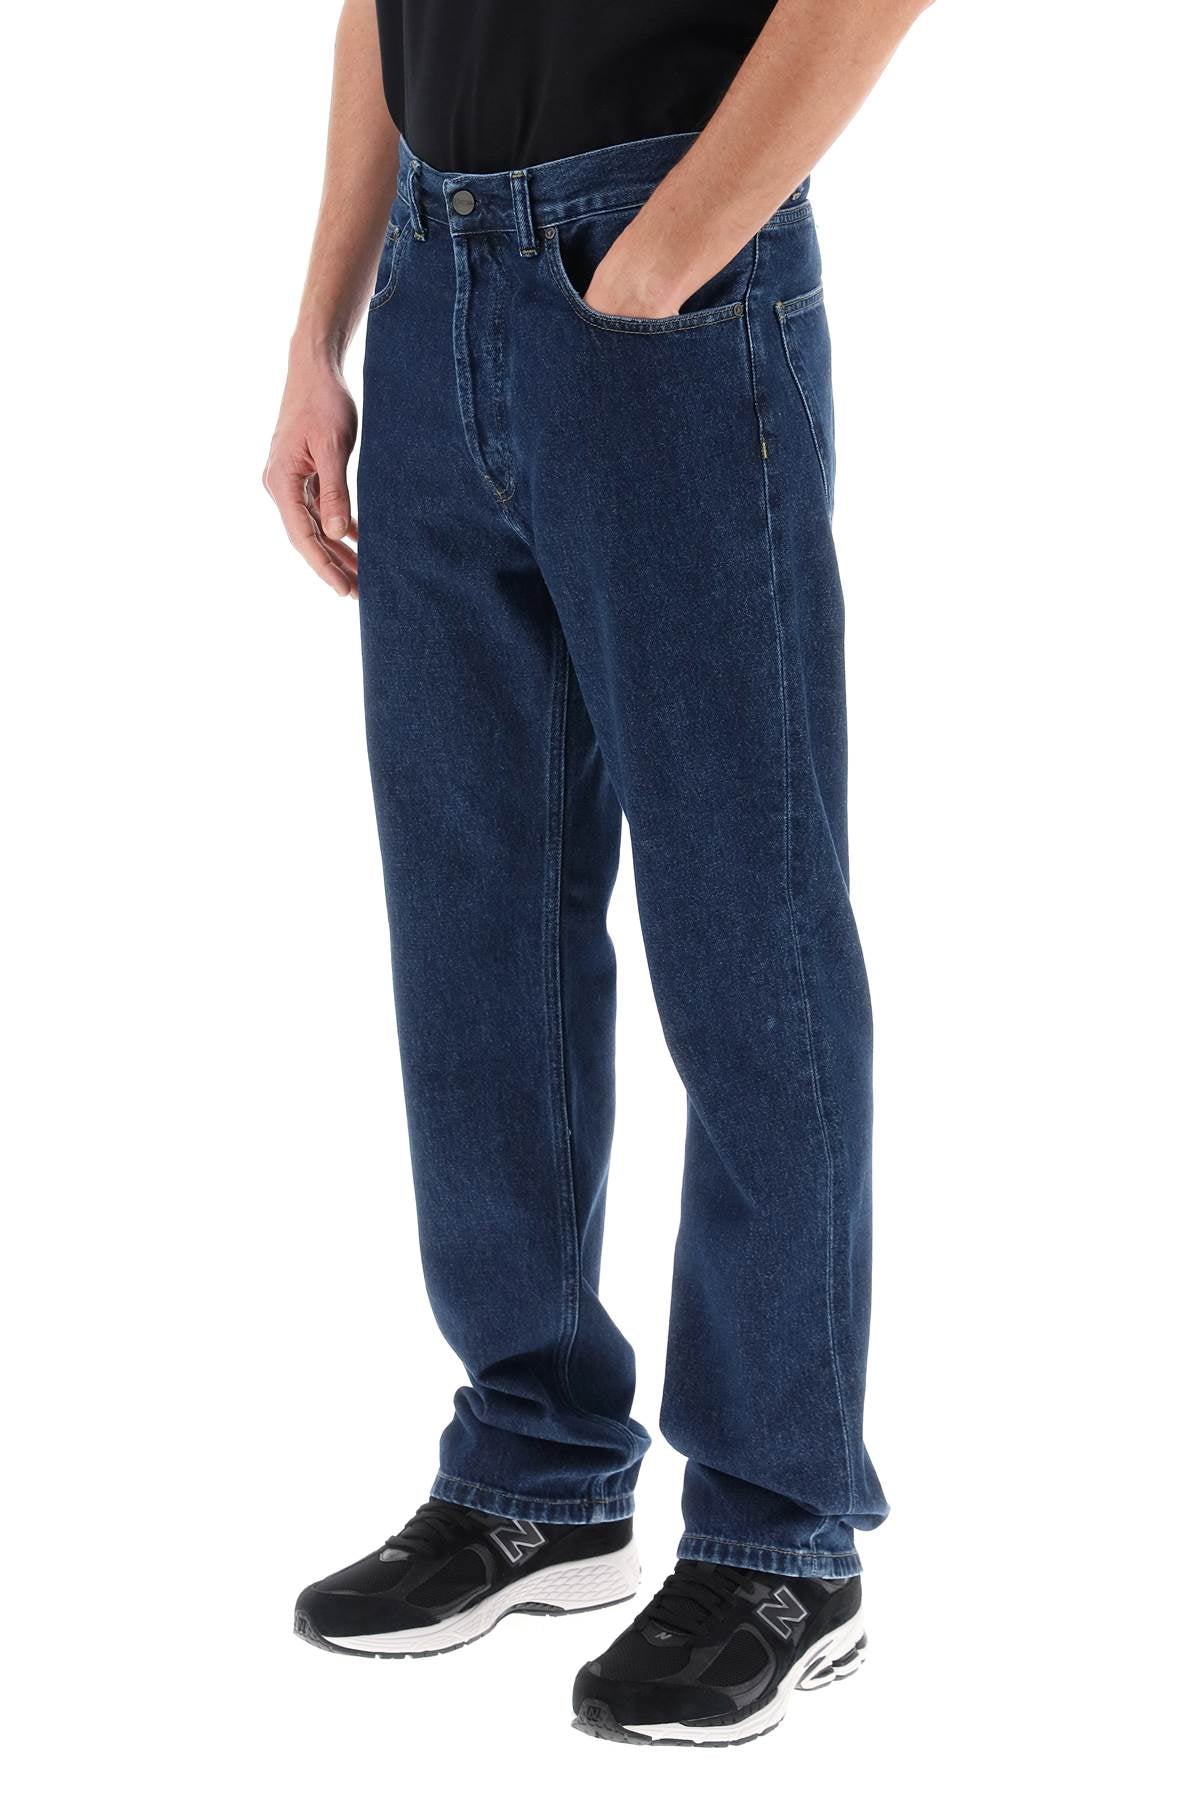 Carhartt wip nolan relaxed fit jeans-3